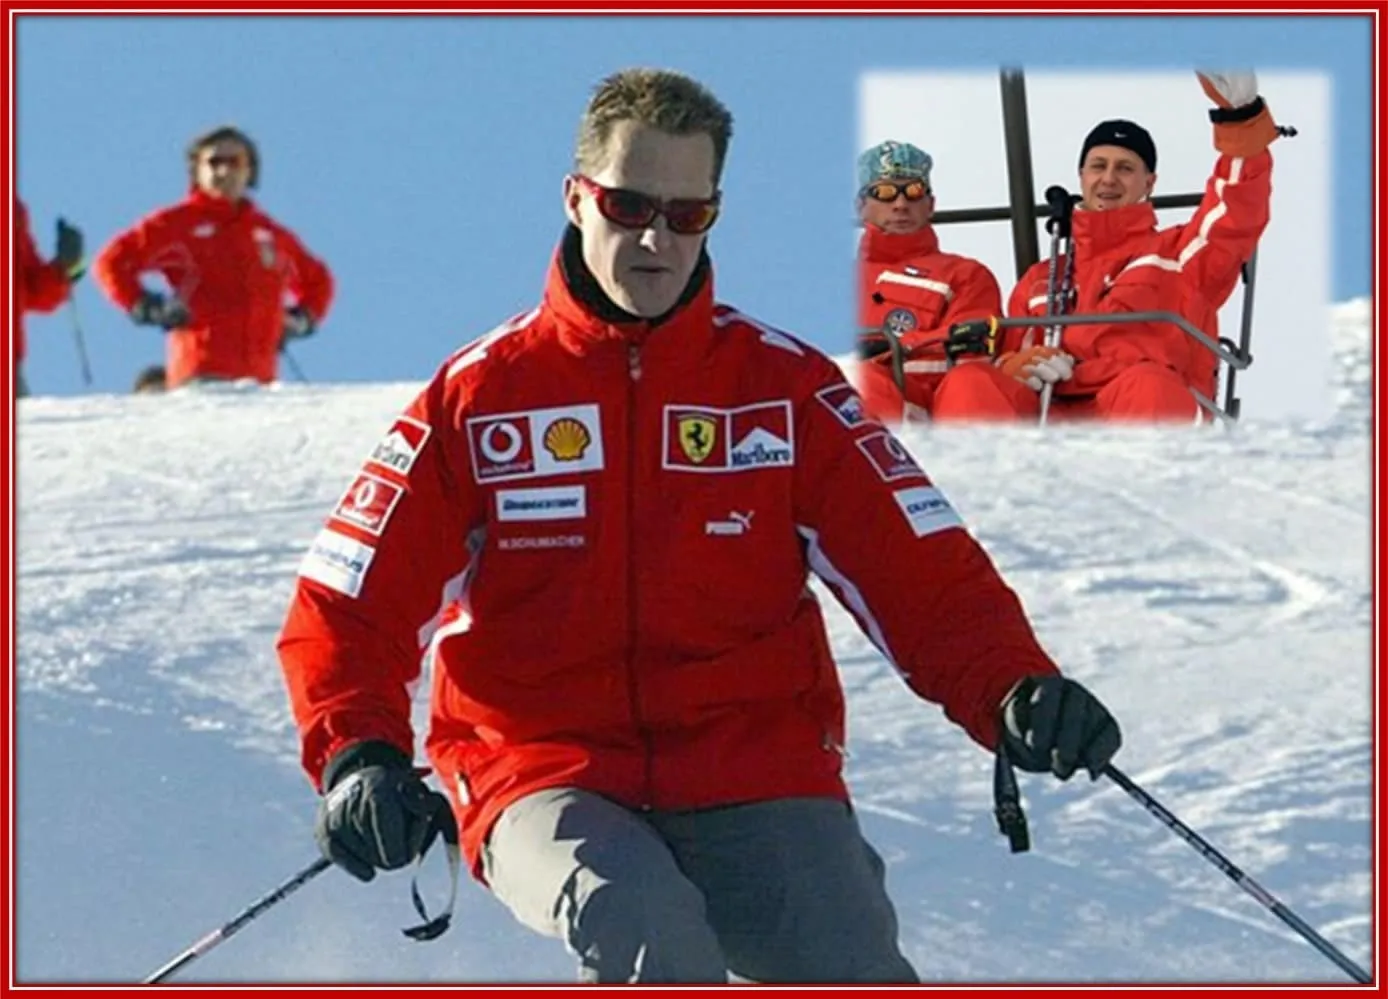 Michael Schumacher's high-octane hobby aside from racing is Skiing.